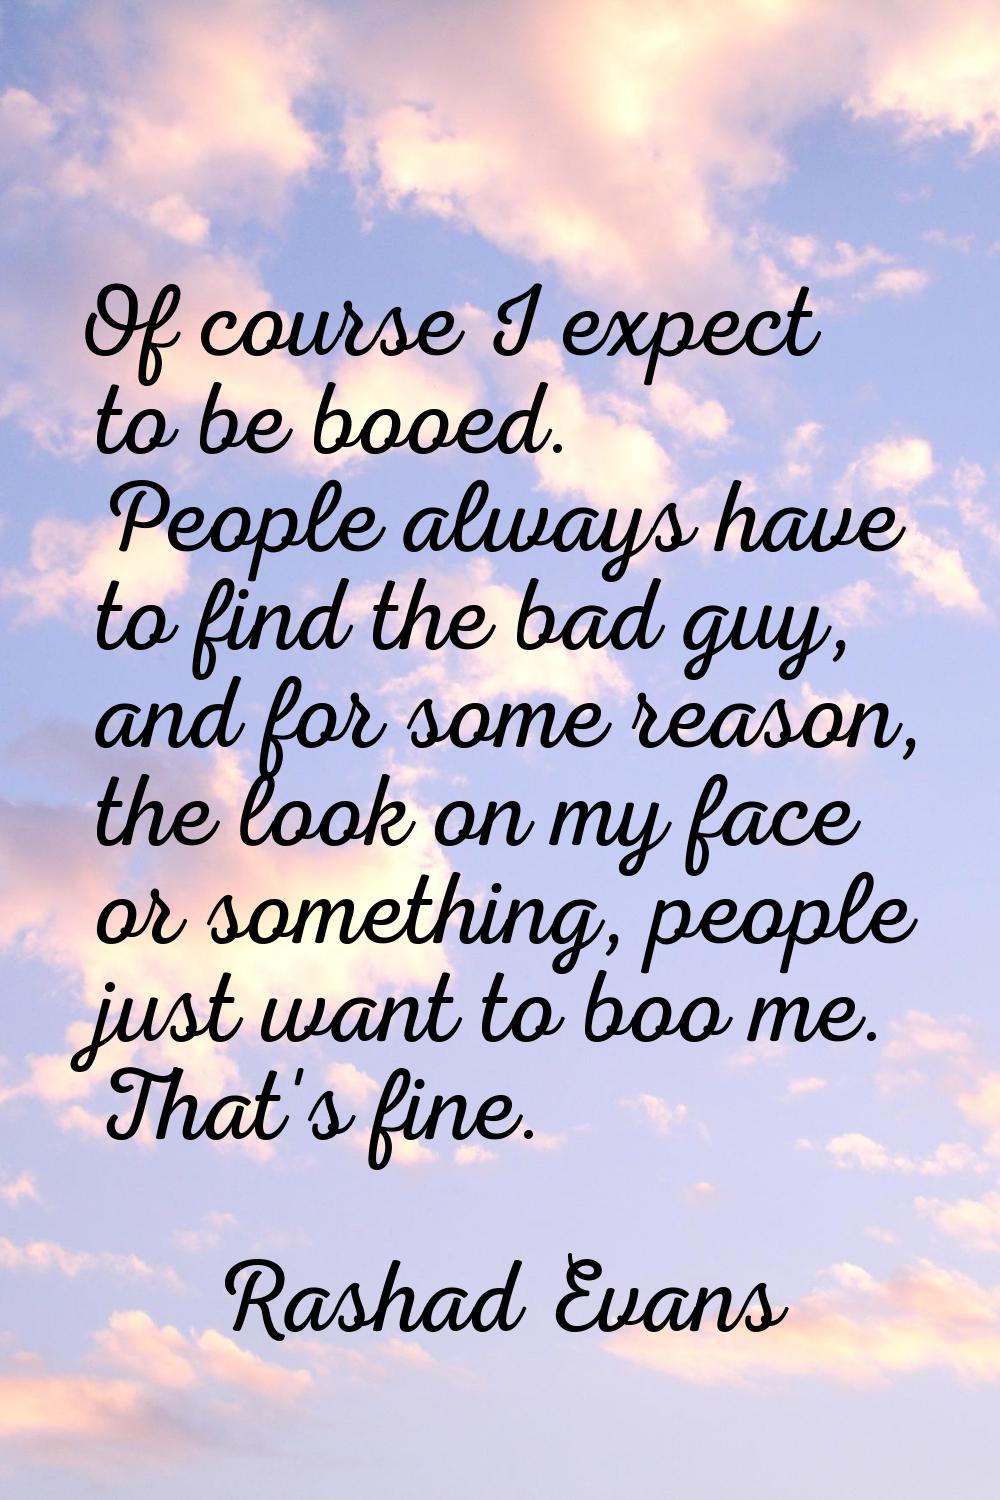 Of course I expect to be booed. People always have to find the bad guy, and for some reason, the lo